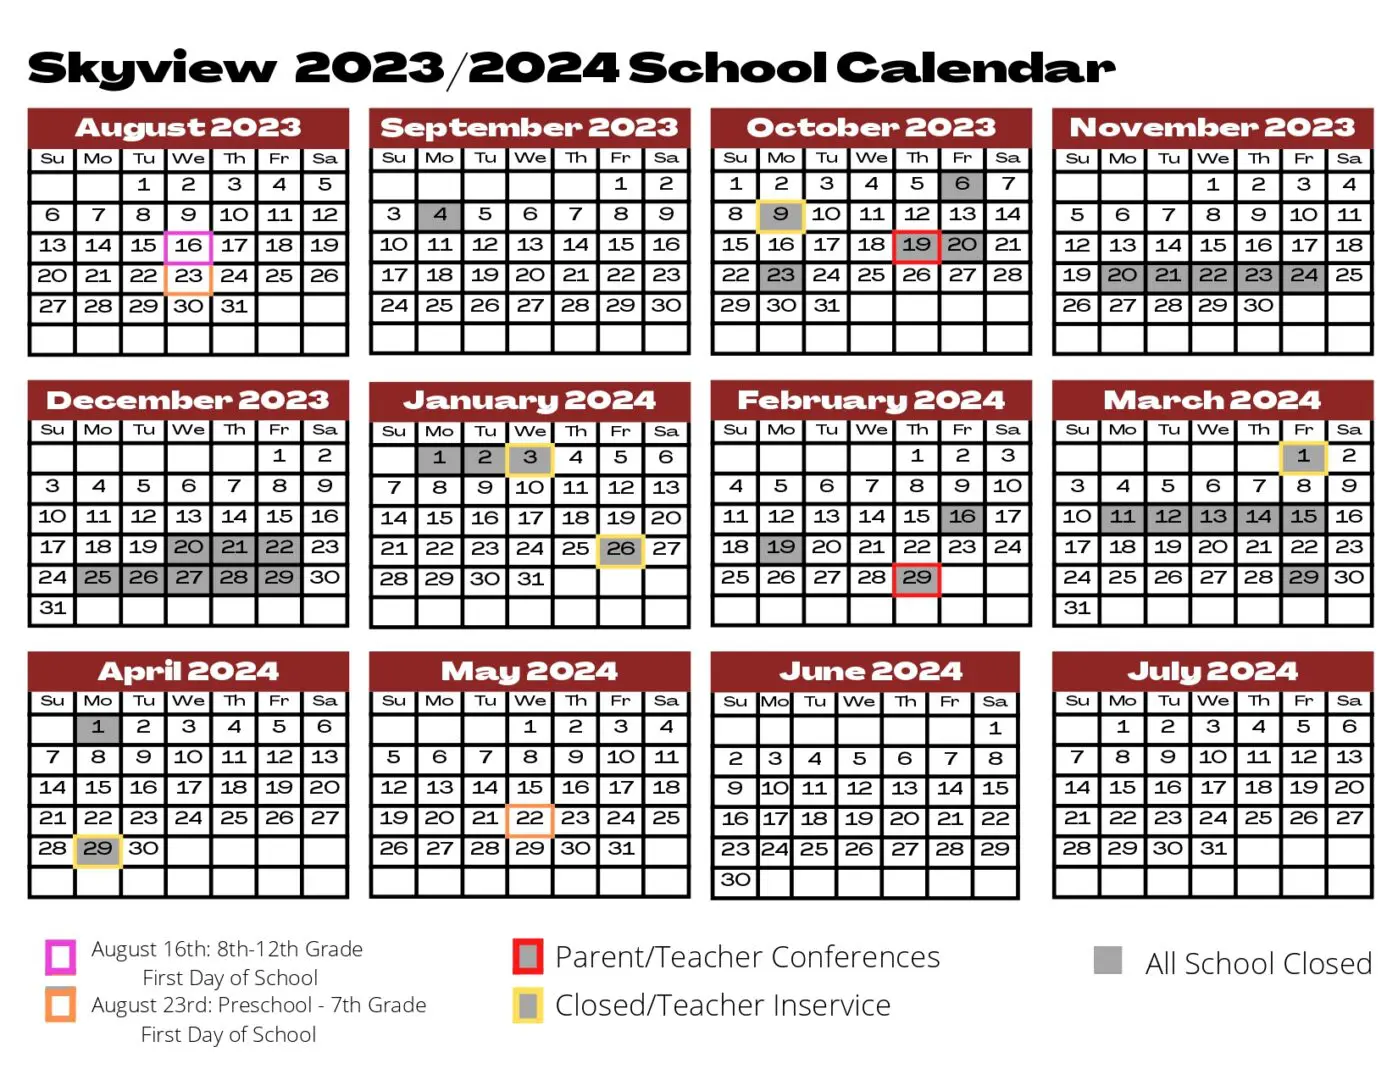 A calendar with all the school year 's listed.